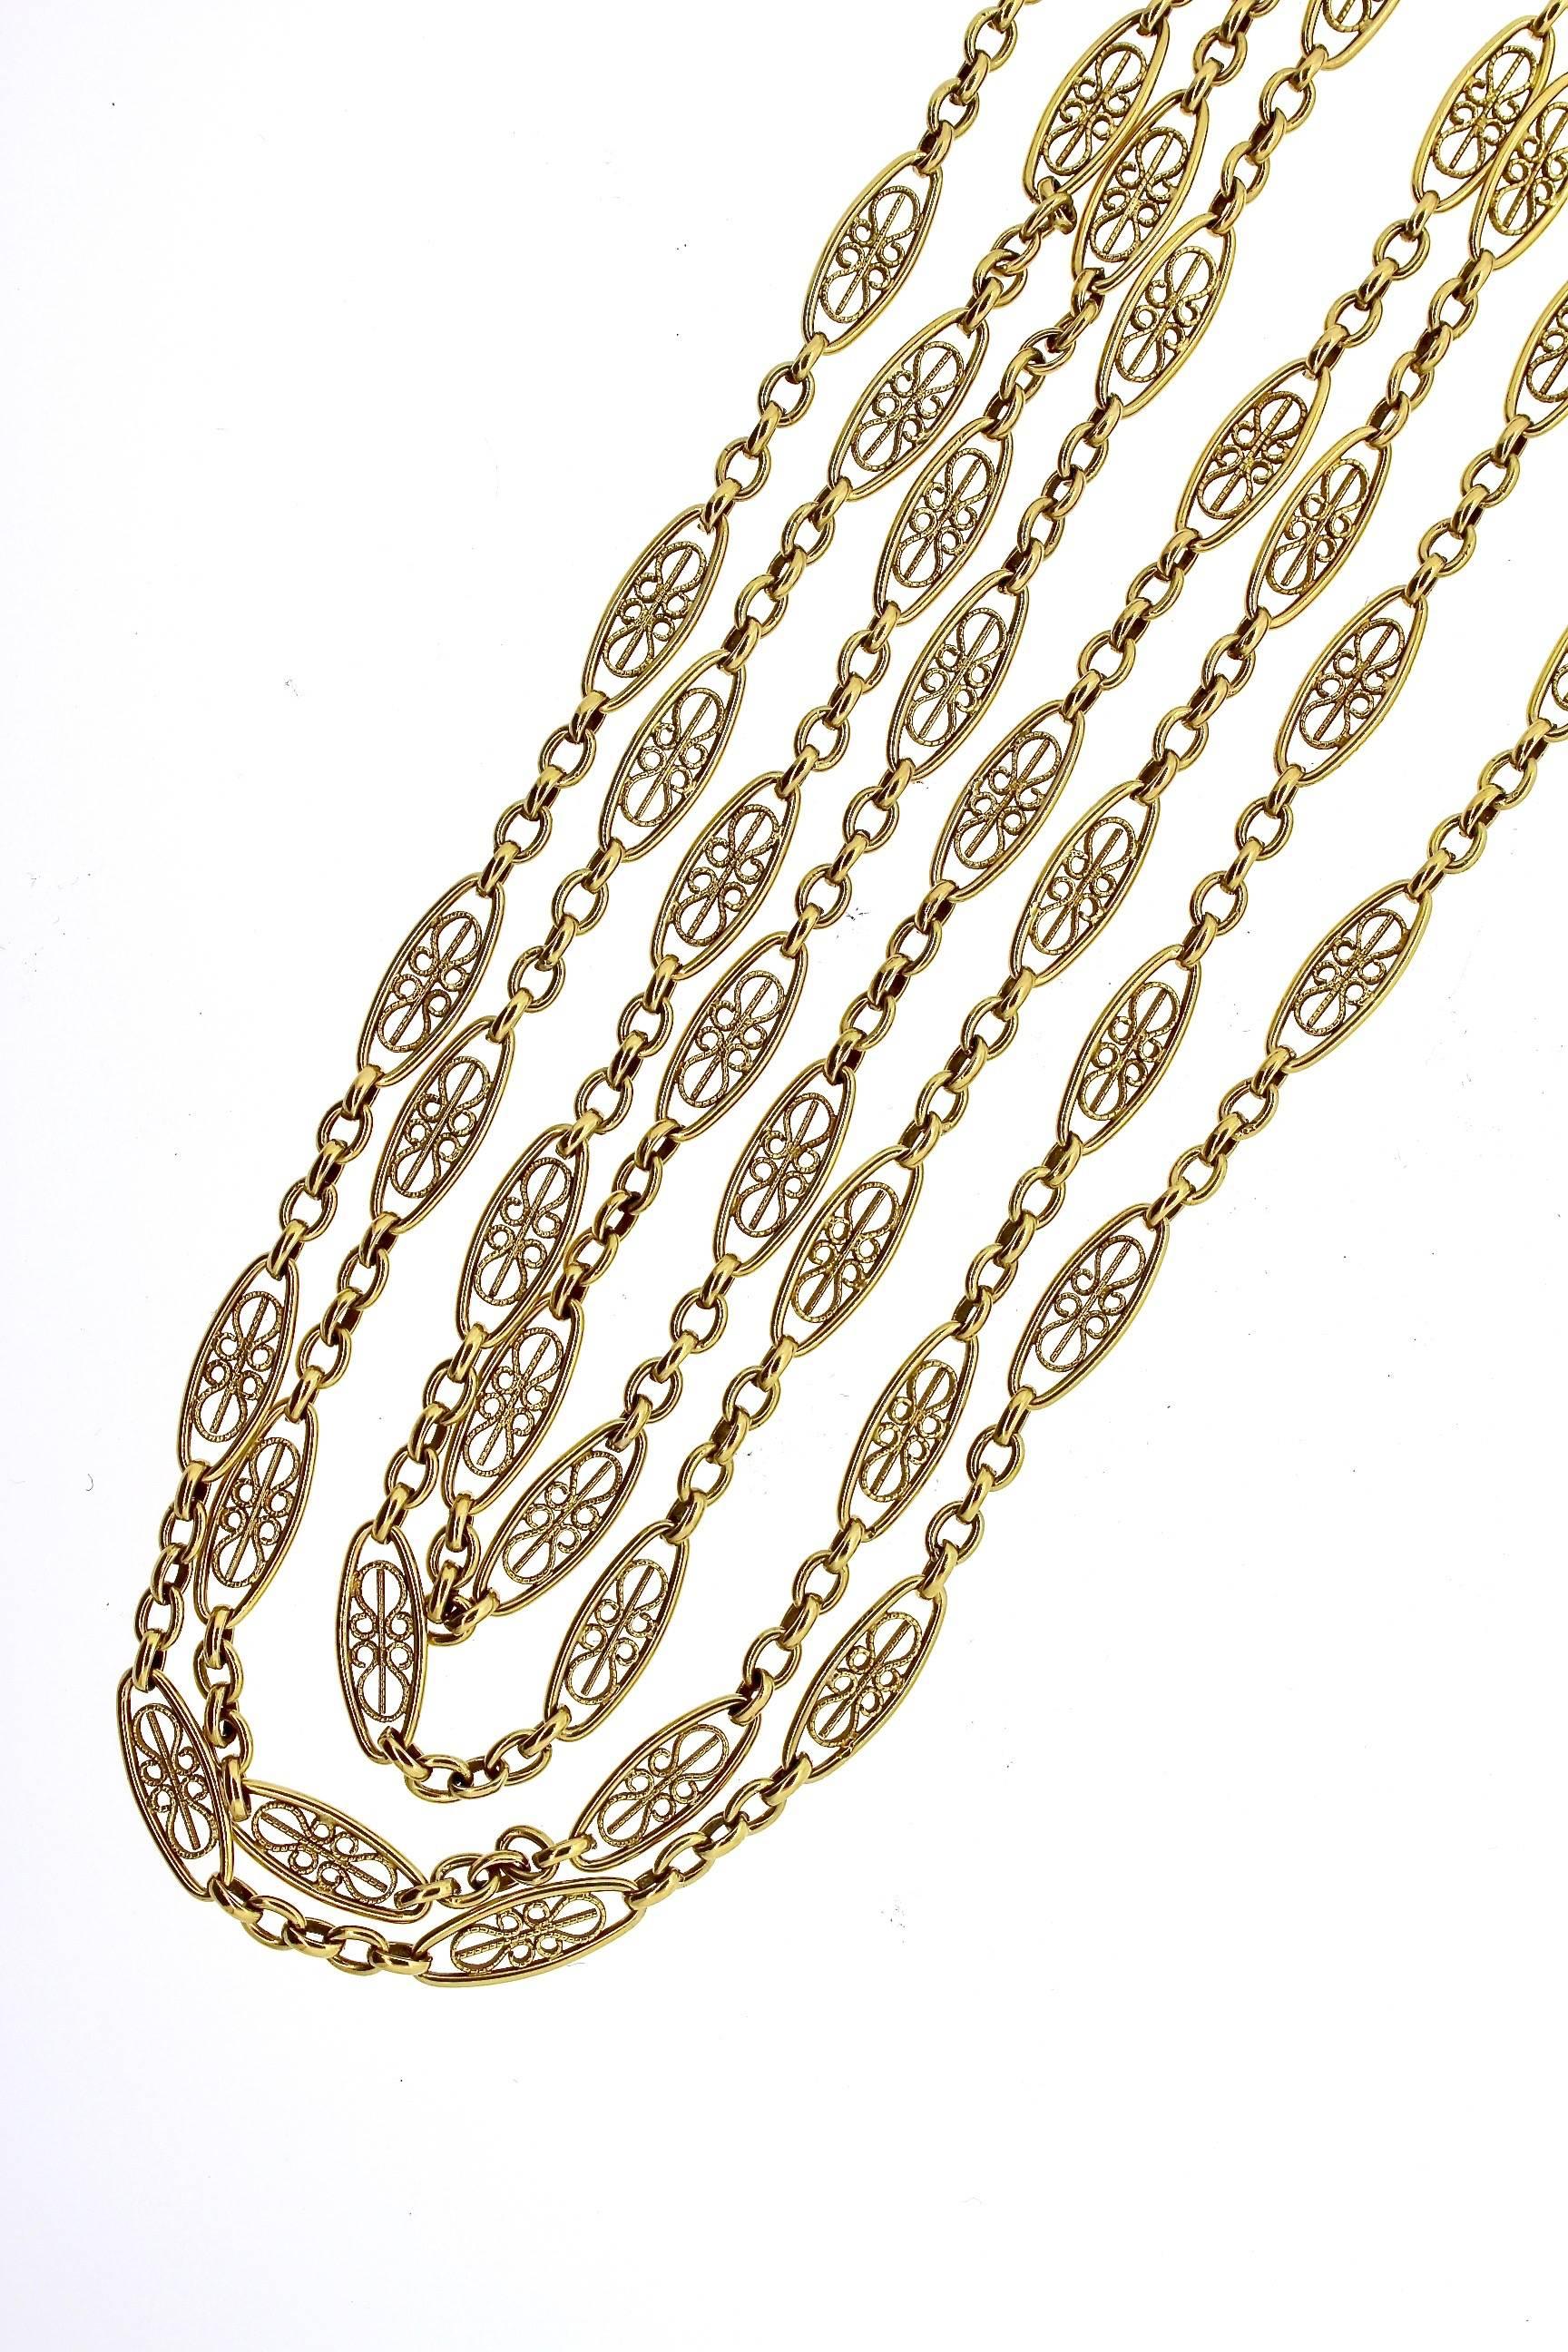 Gold chains are so stylish and easy to wear in todays fashion.  Vintage chains add character and a twist to today's modern choices.  This antique chain was made in the early 20th Century and features beautiful filigree scroll links.  The chain was